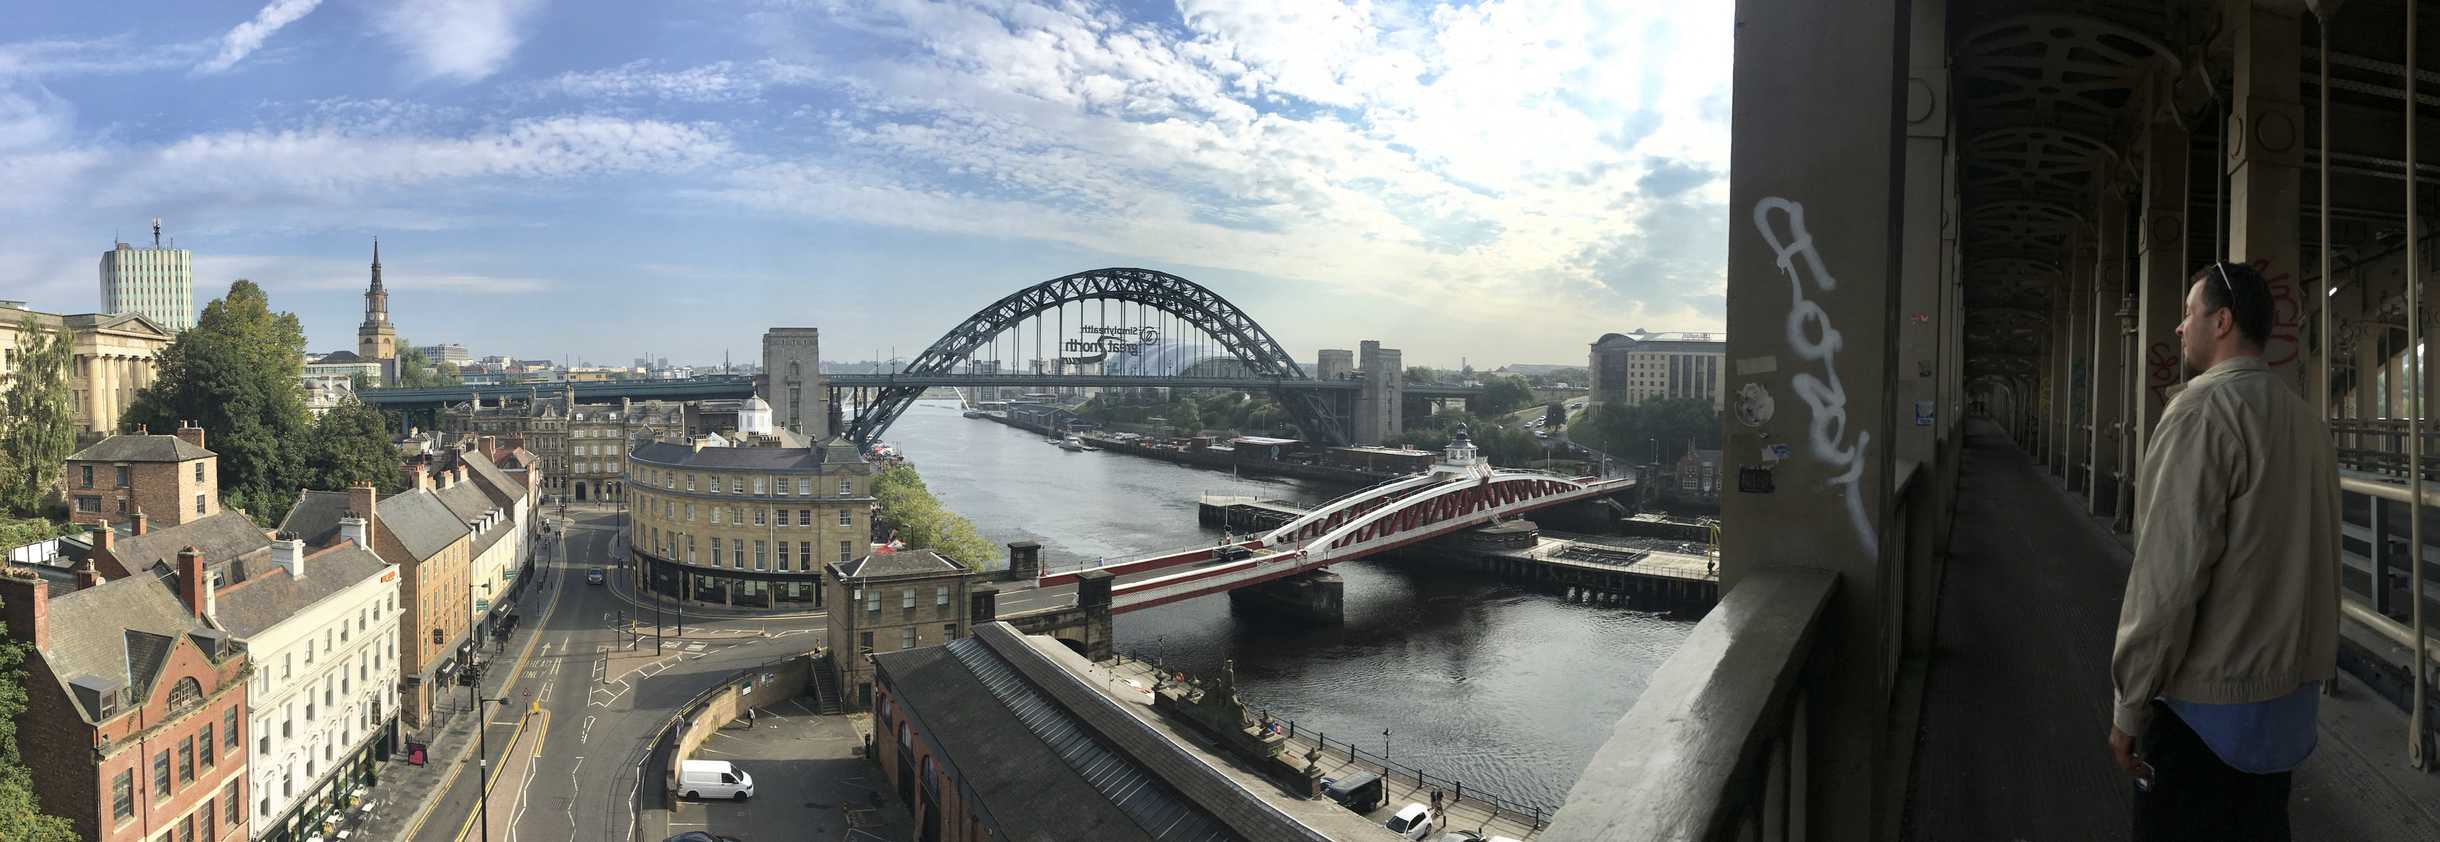 24 Hours in Newcastle